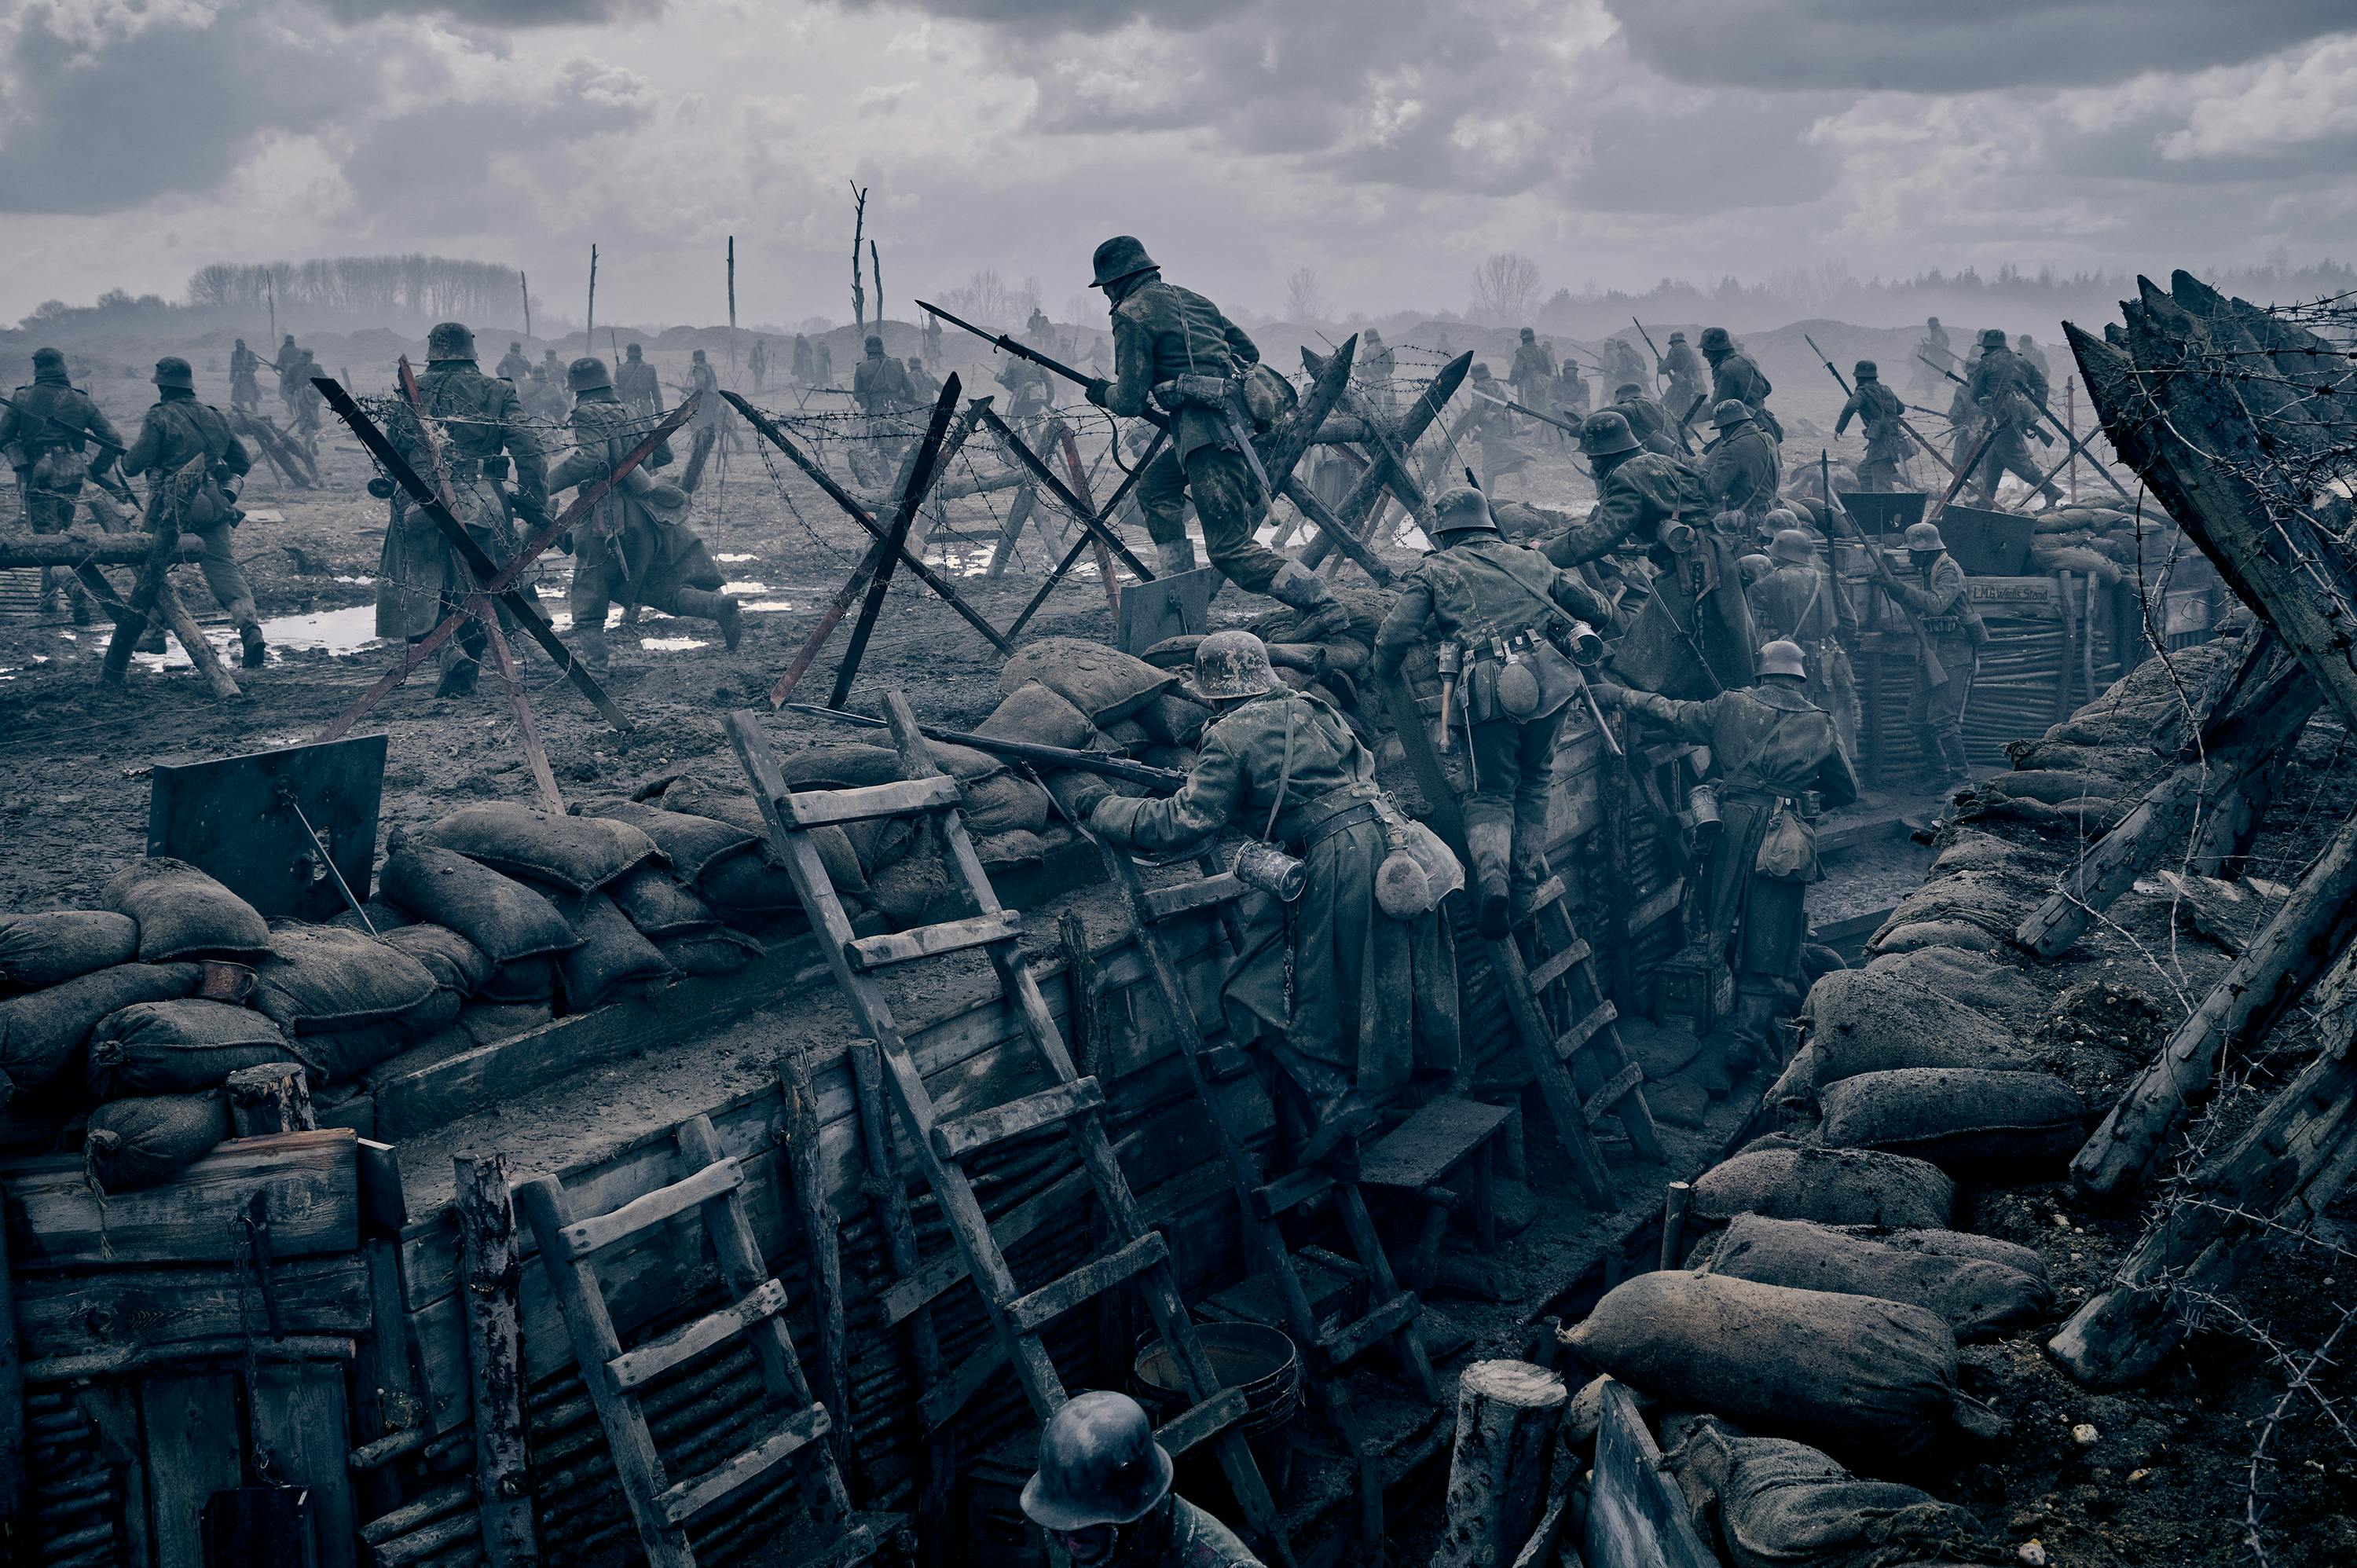 A grey battle scene in the trenches. Men in uniforms with guns scatter.